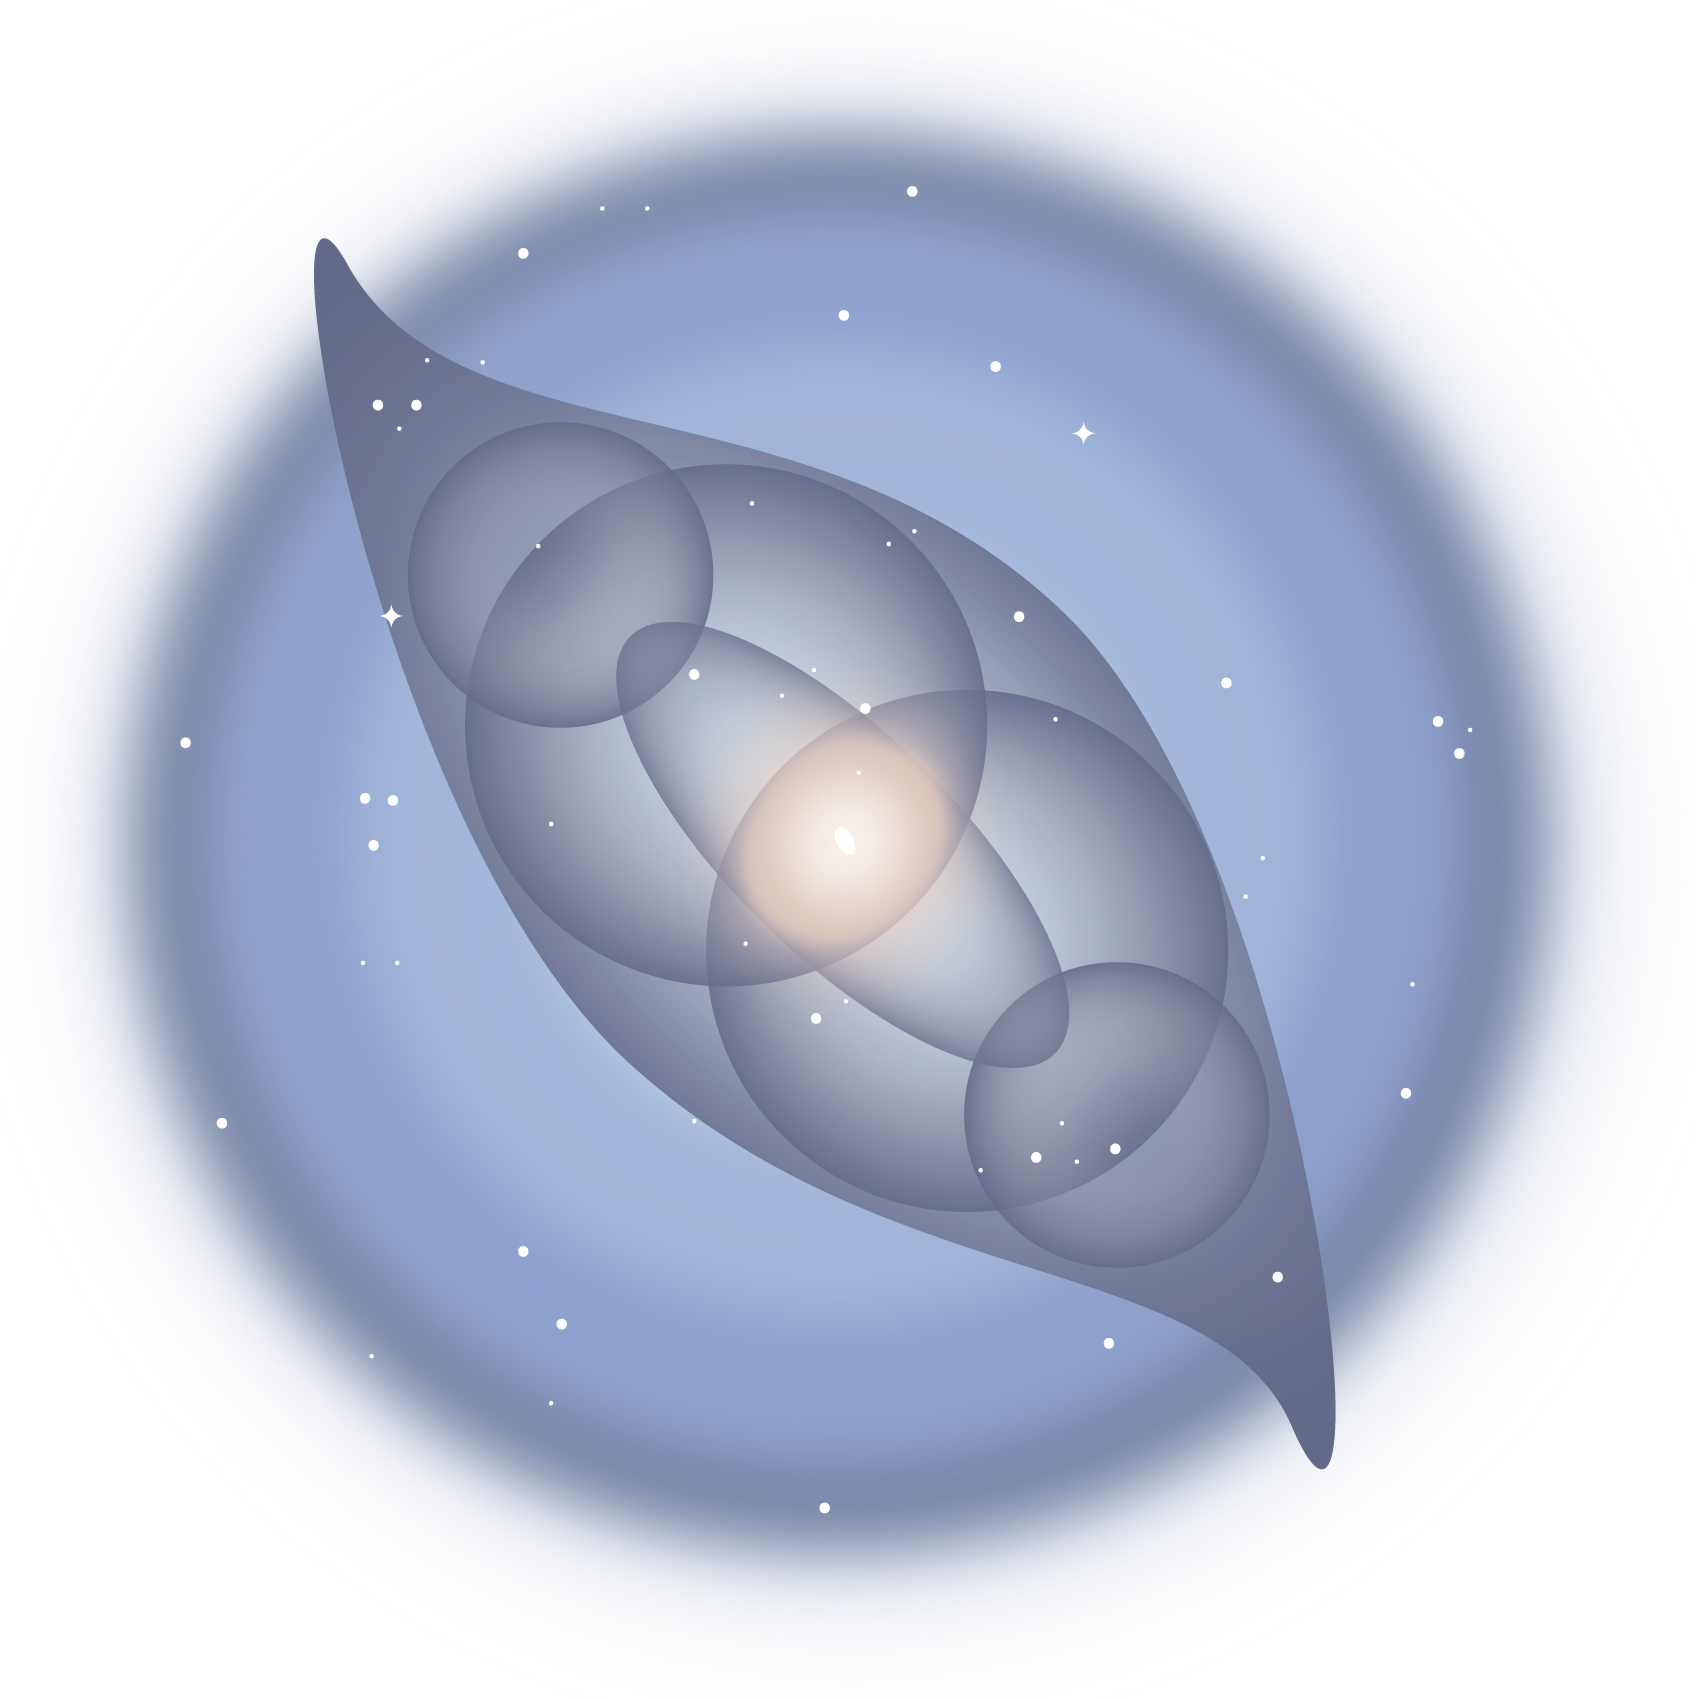 In the background is a hazy blue circle, with dark, transparent blue around the edge and lighter/brighter blues leading inward. In front of the blue circle is a blueish-gray object, shaped like a minimal, twisty lemon. Inside of this shape is a central, light yellow, cloudy circle with a bright white spot in the middle. All within the lemon-shaped object, the white spot is surrounded by an oblong oval shape which is overlapped by two large circular shapes and two small circular shapes. White dots representing stars speckle the image.